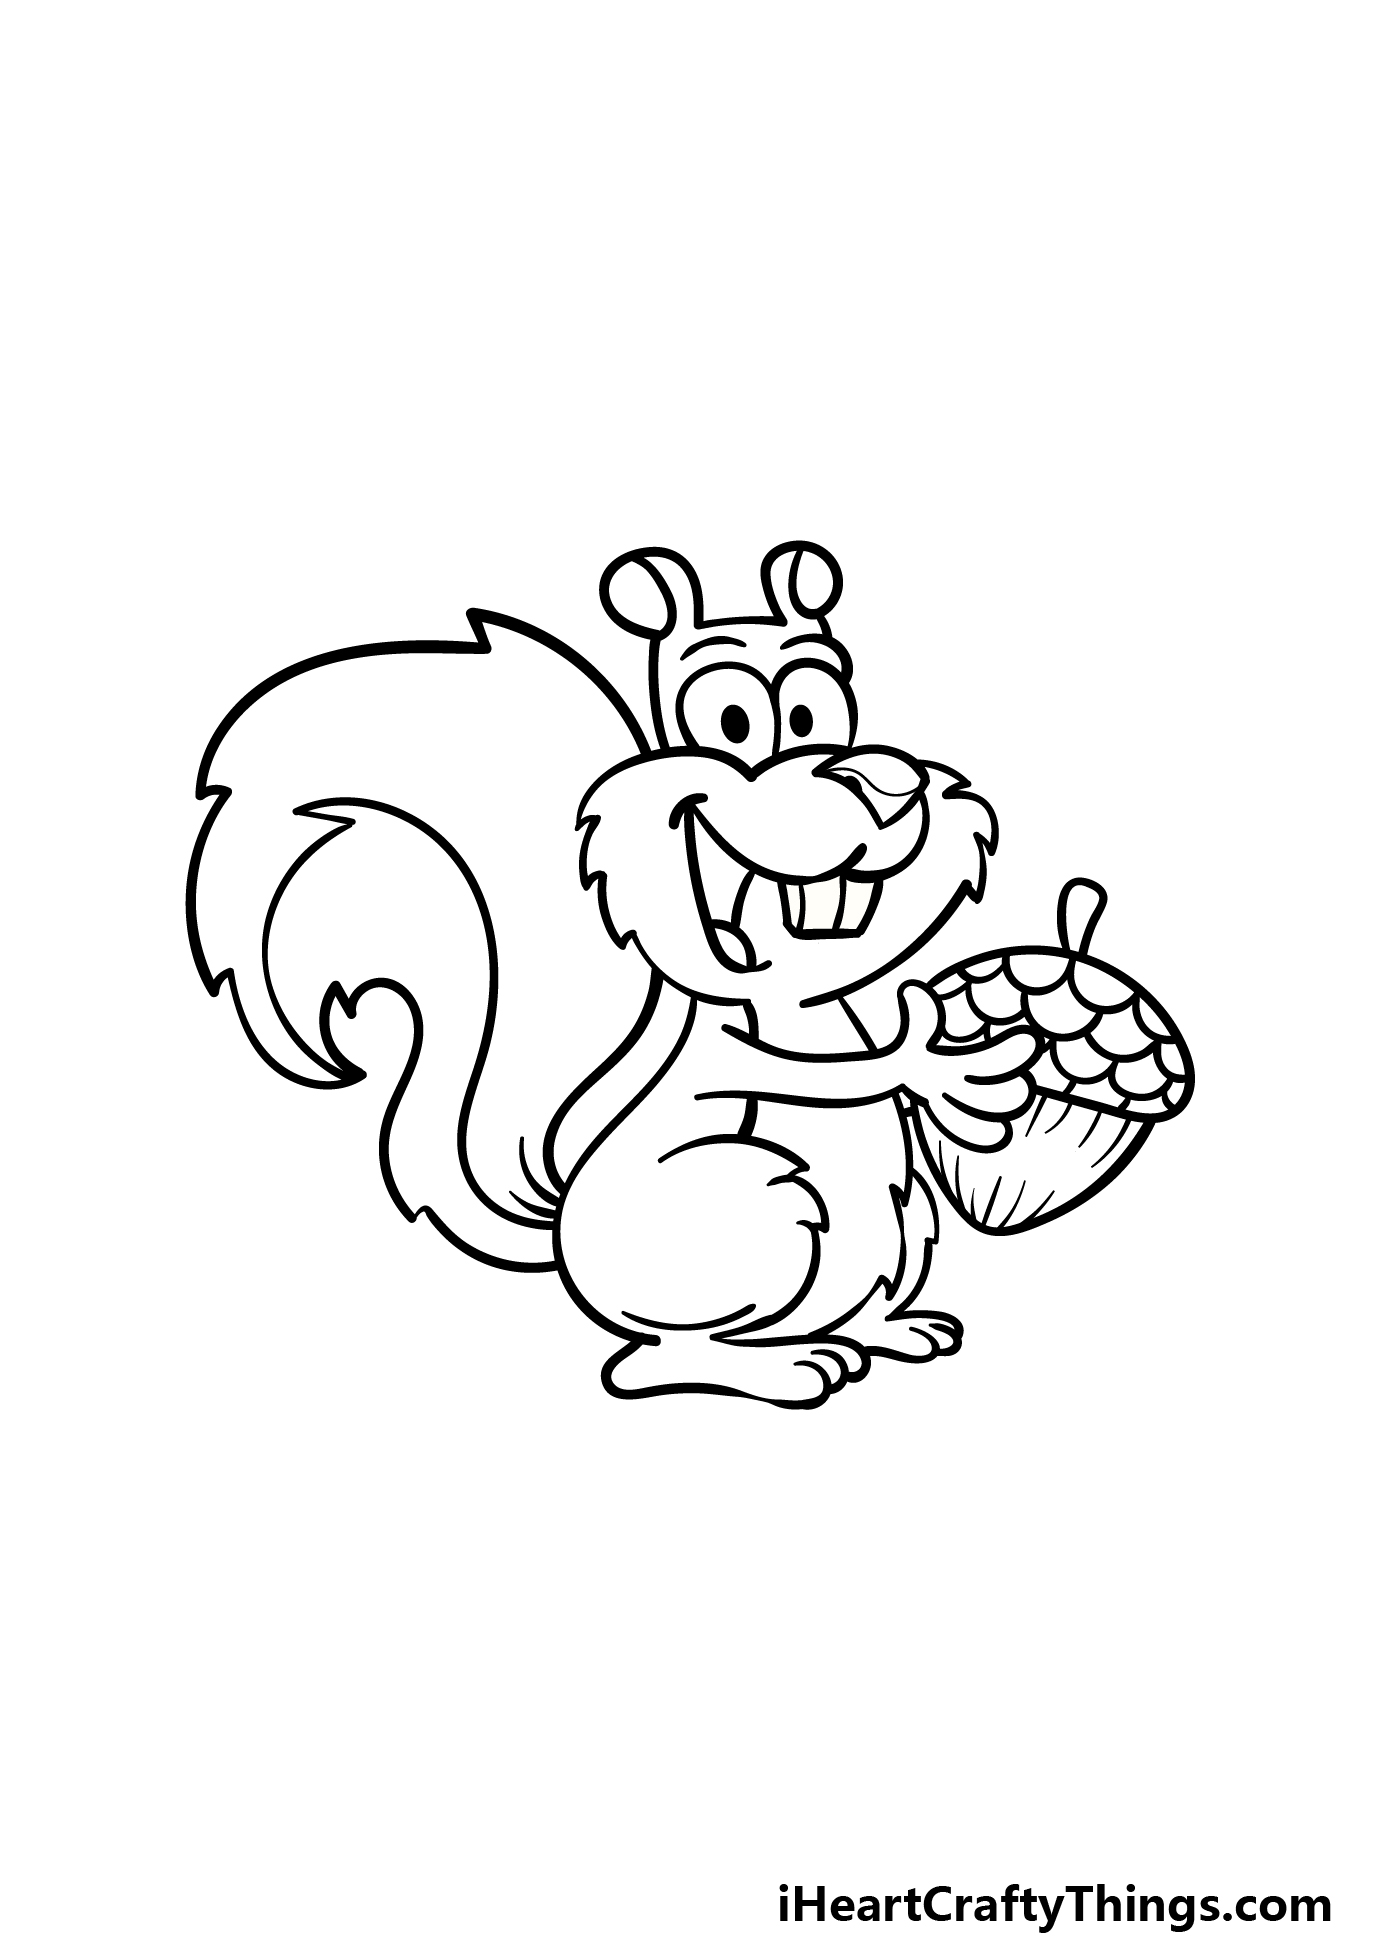 how to draw a cartoon squirrel step 5